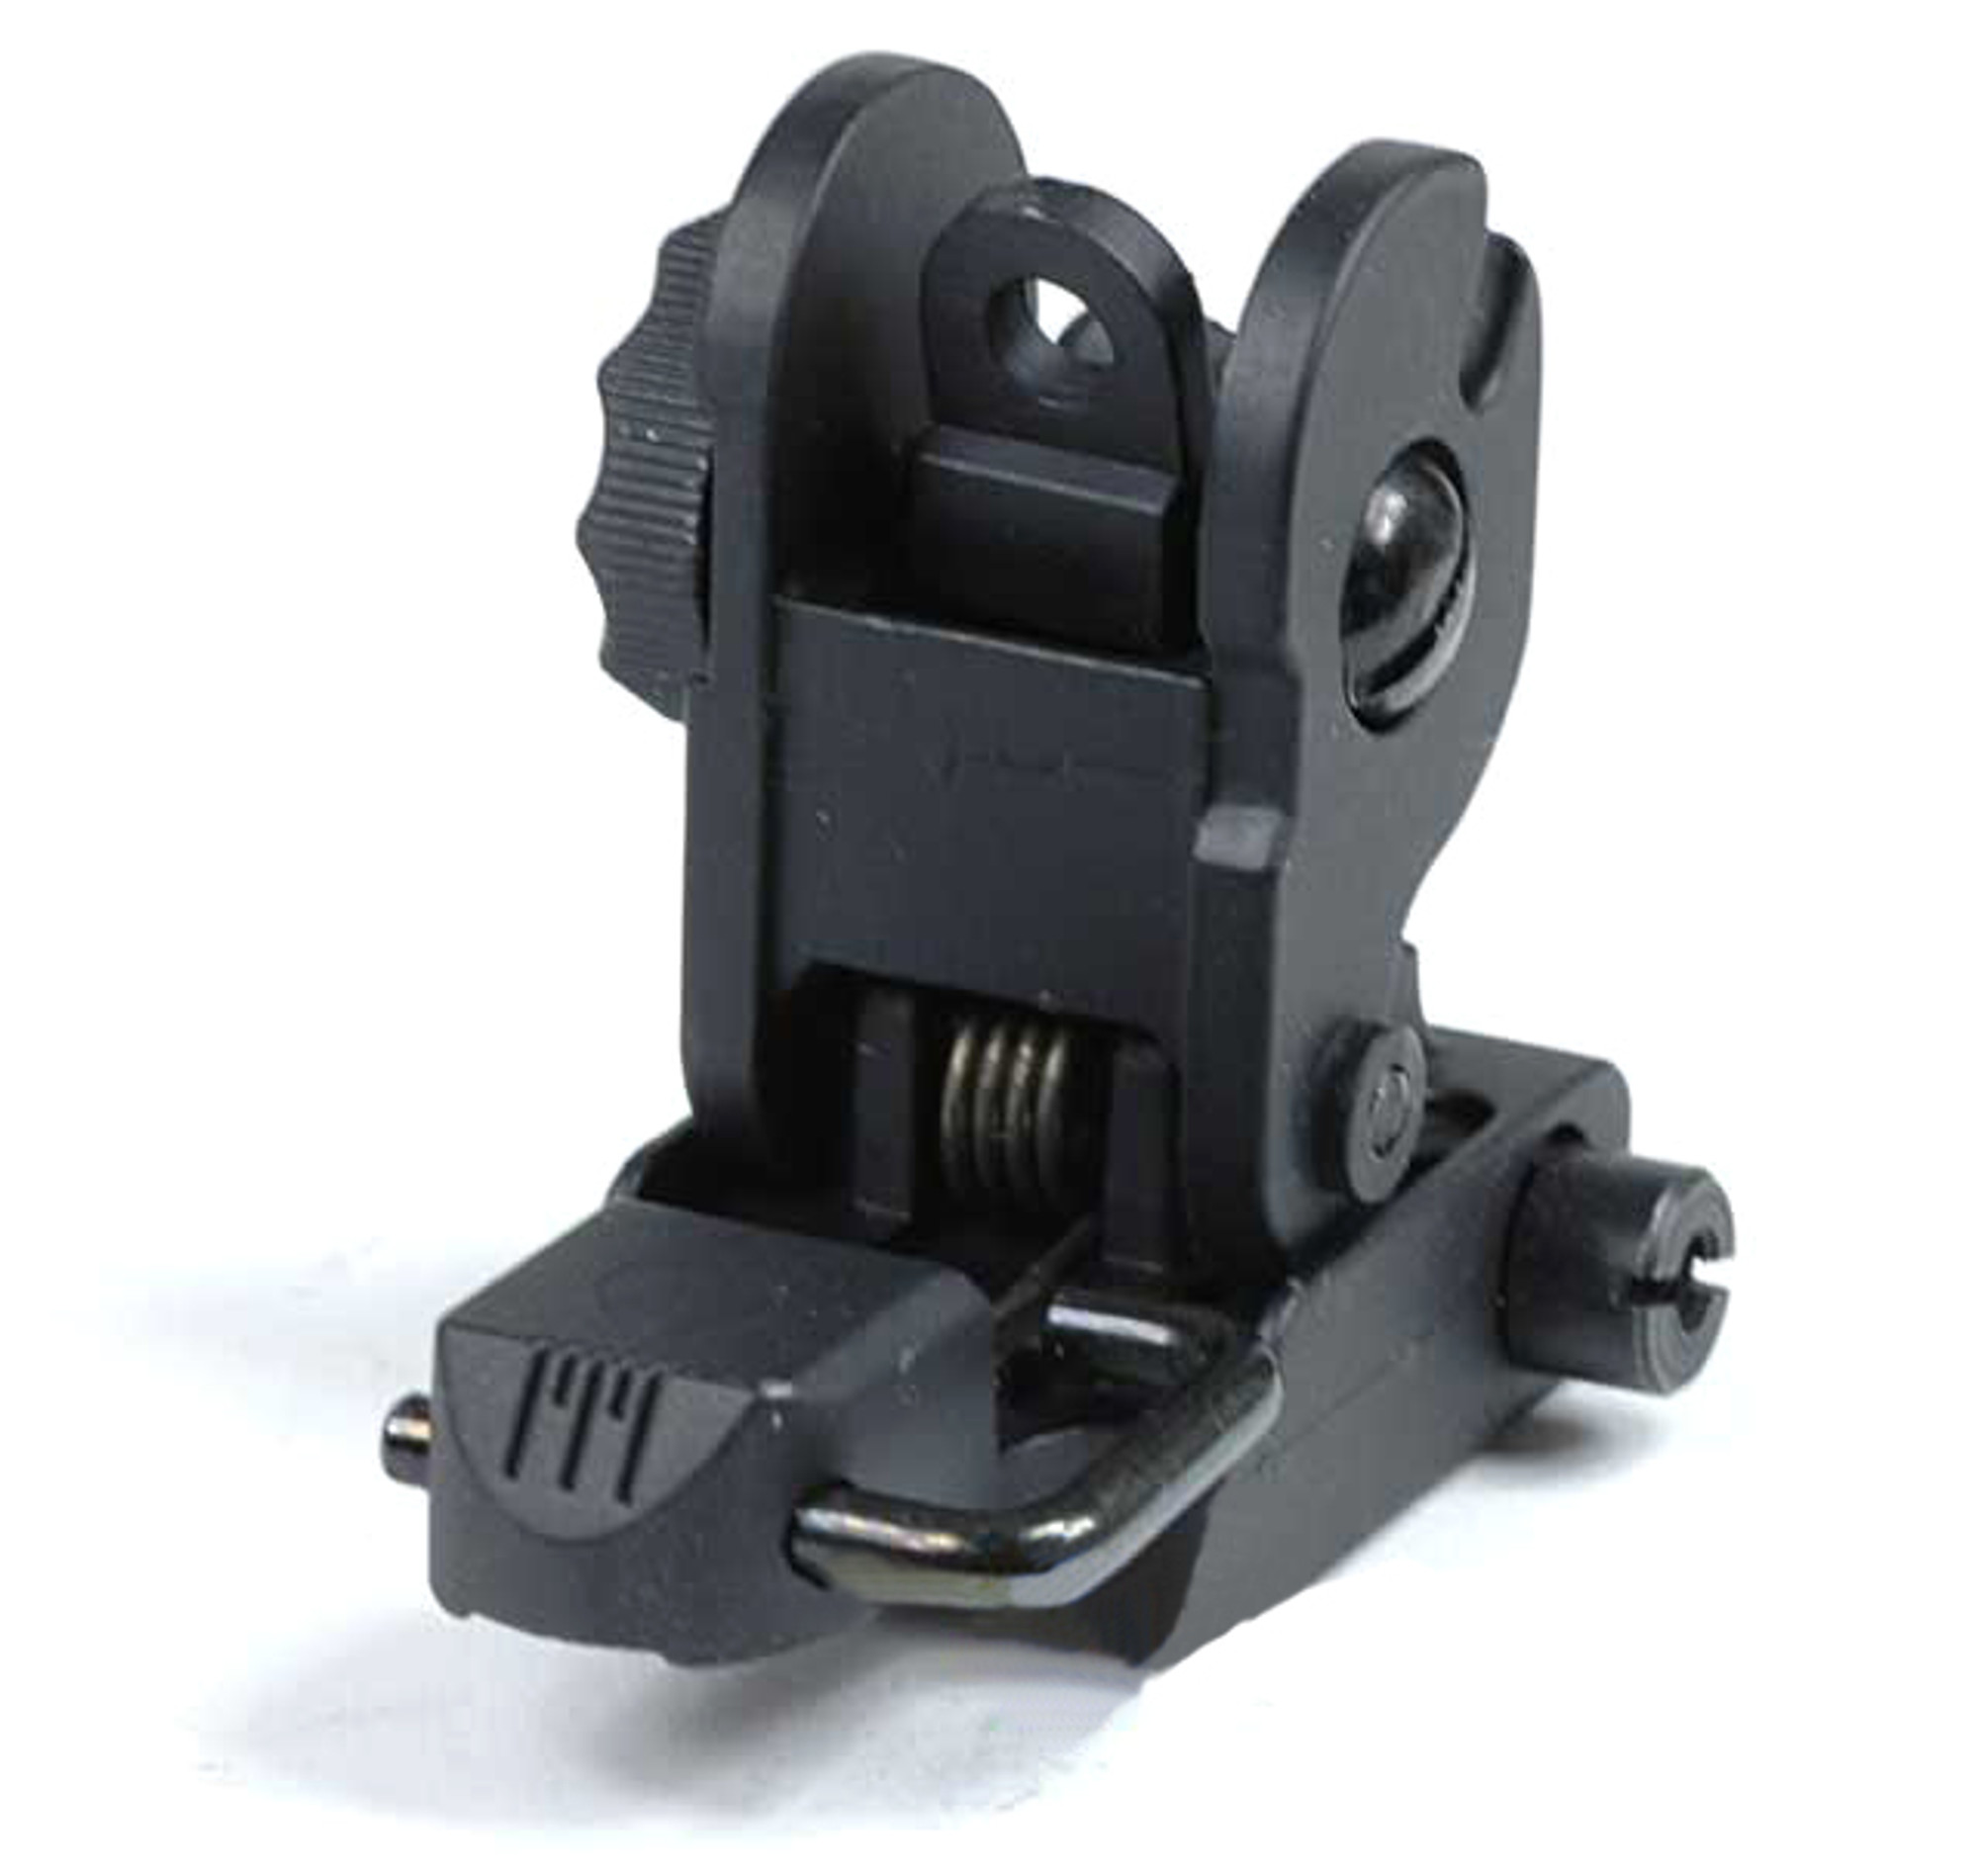 A&K Full Metal 300M And 600M Flip-Up Rear Sight System for Airsoft AEG  Weaver Rails